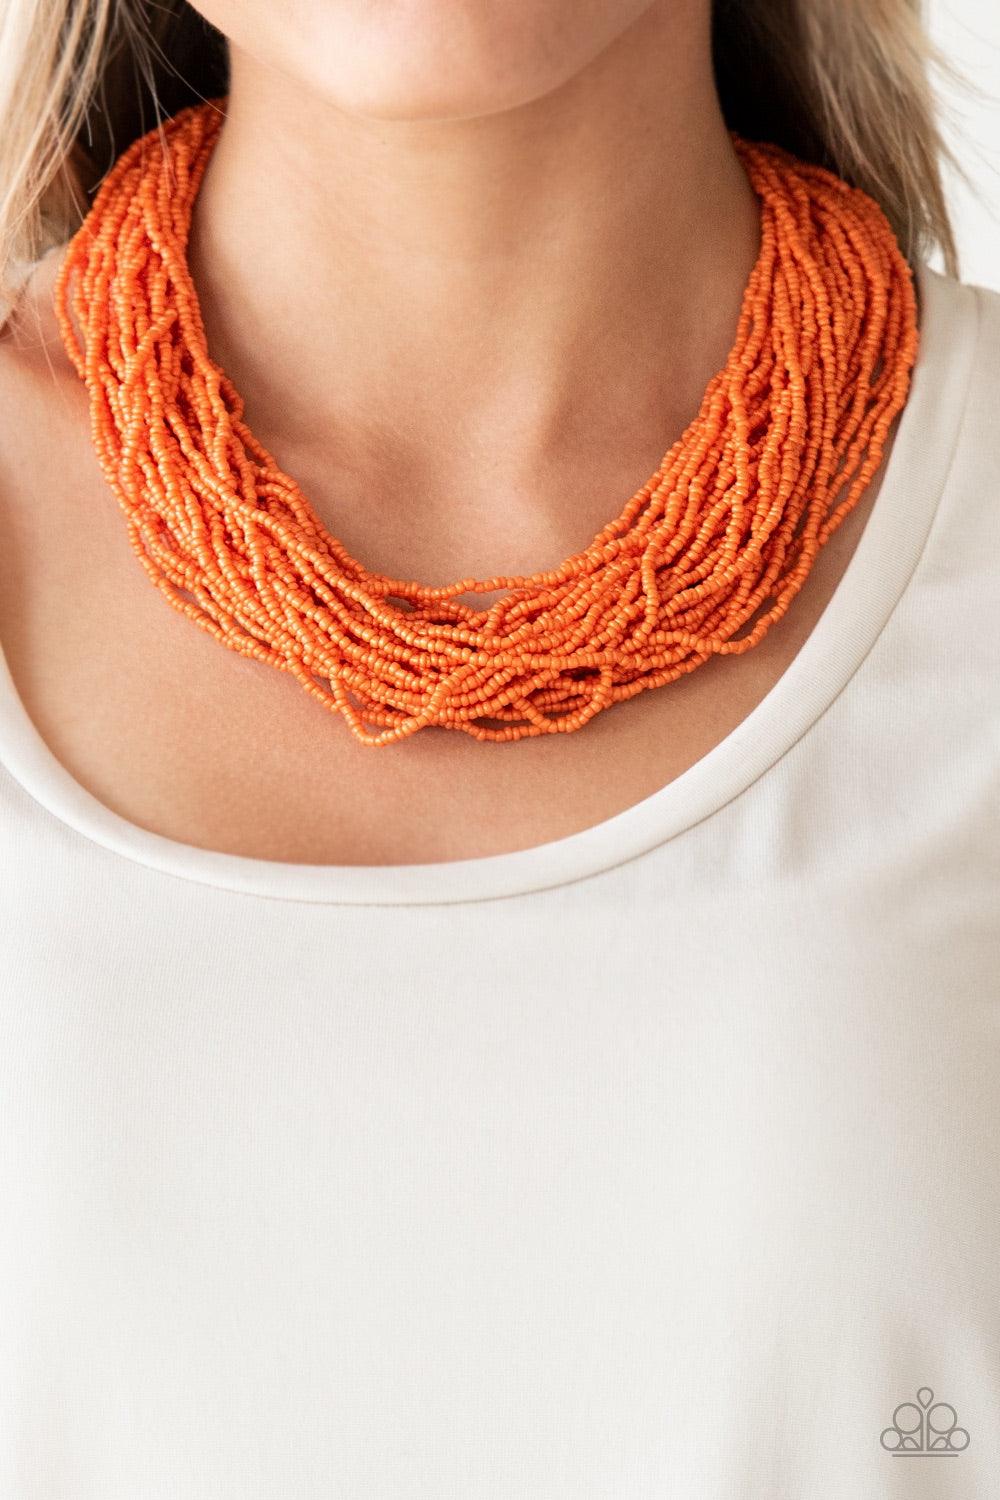 Paparazzi Accessories The Show Must CONGO On - Orange Infused with two bold silver fittings, countless strands of vivacious orange seed beads drape below the collar for a seasonal look. Features an adjustable clasp closure. Jewelry